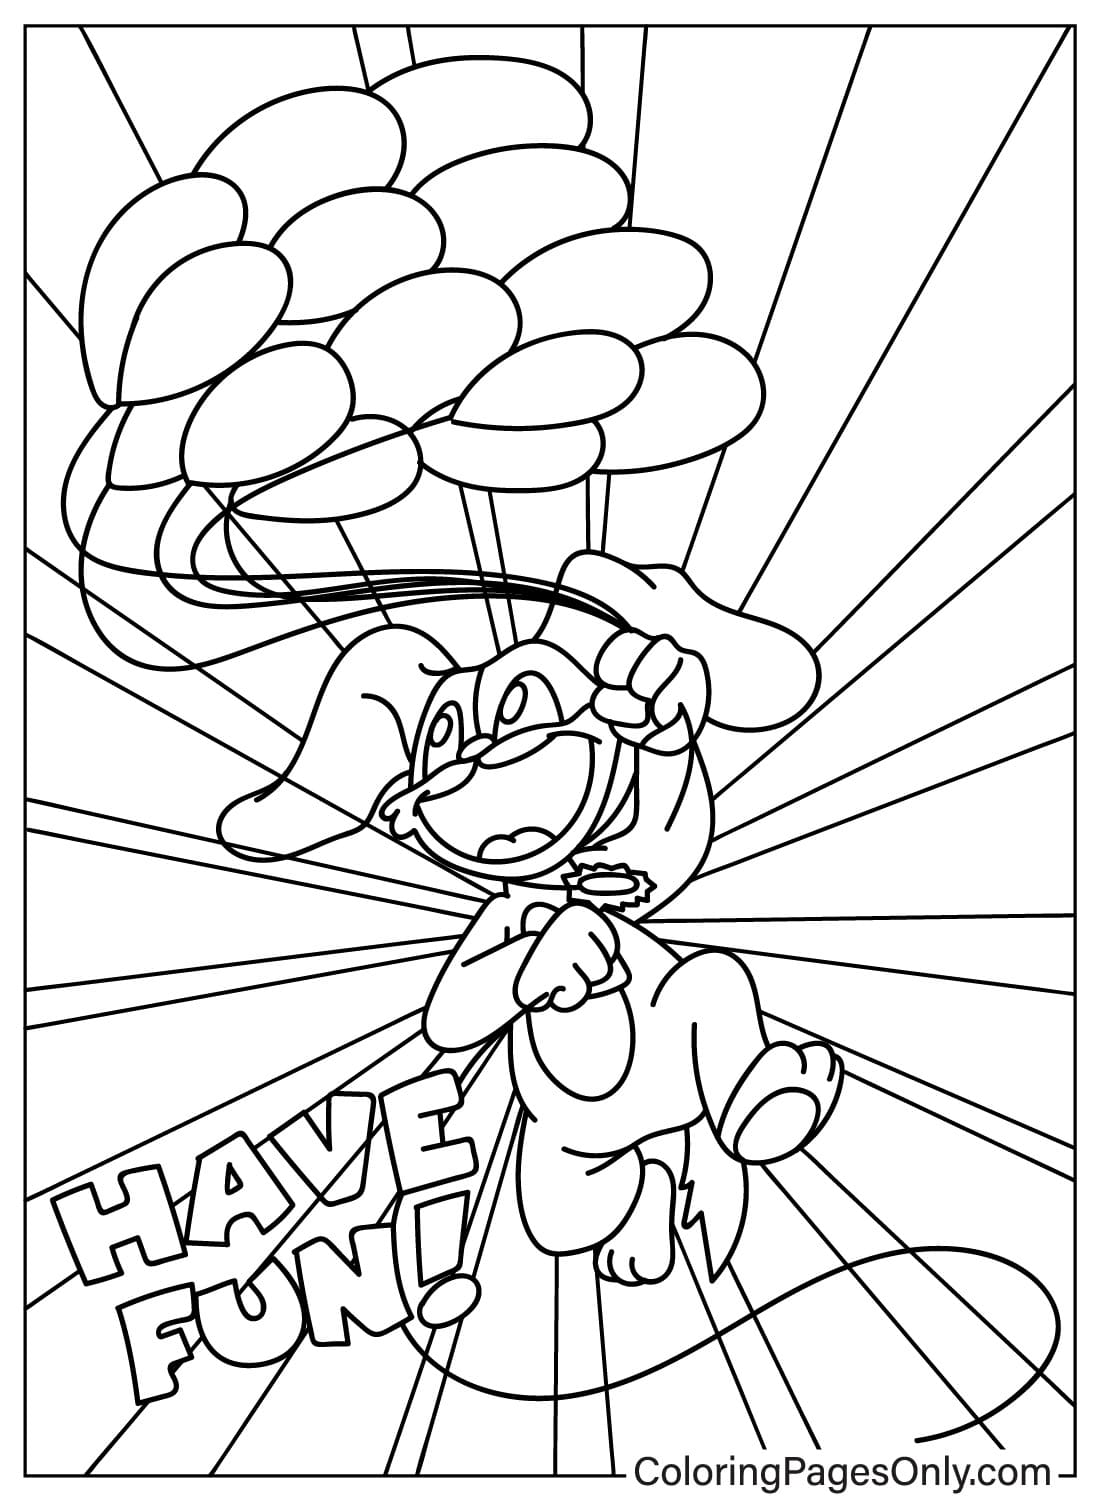 DogDay Coloring Page JPG from DogDay